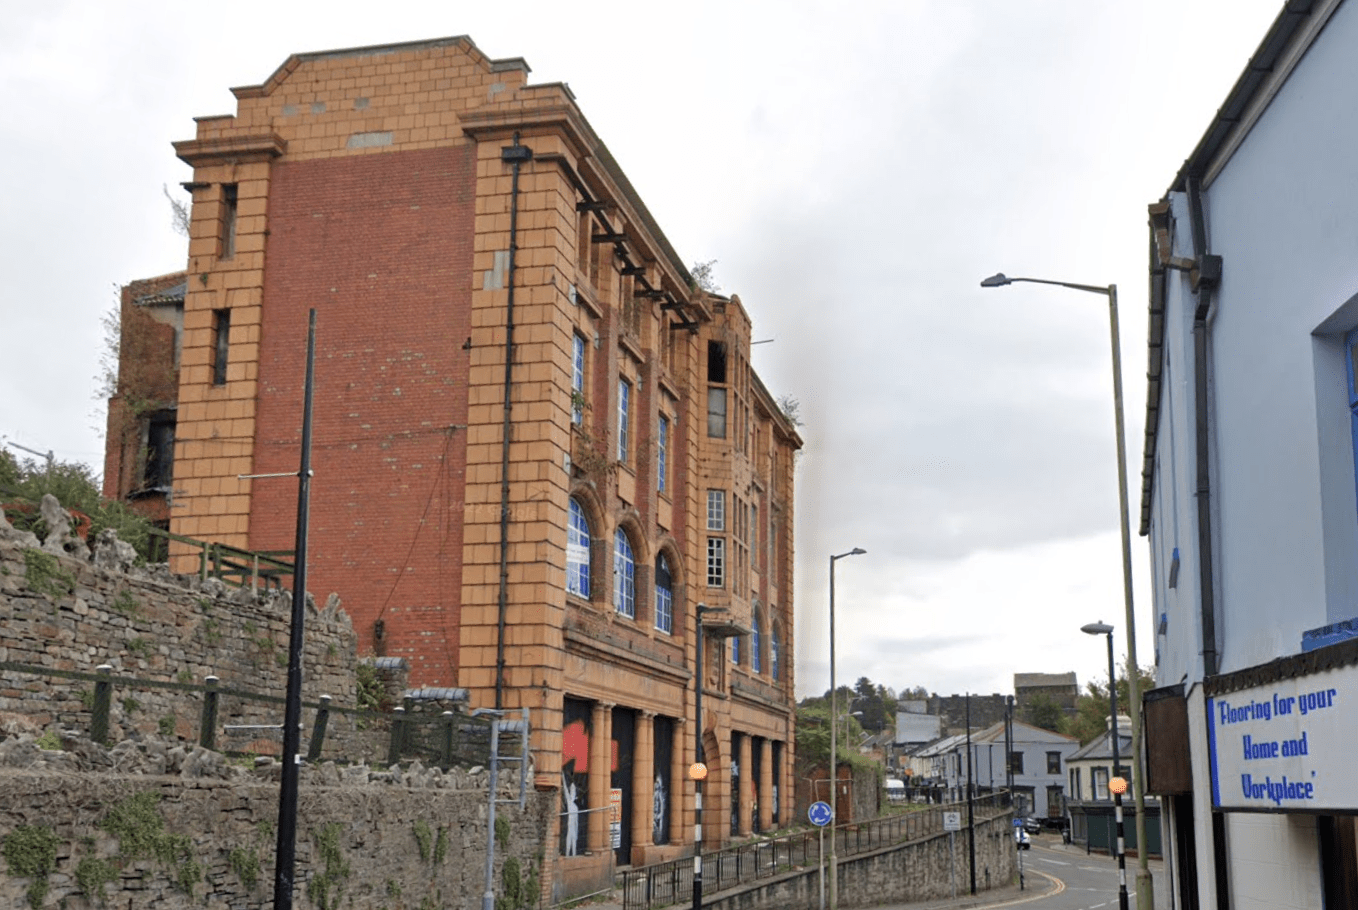 YMCA building in Merthyr “mothballed” allowing new use to be considered